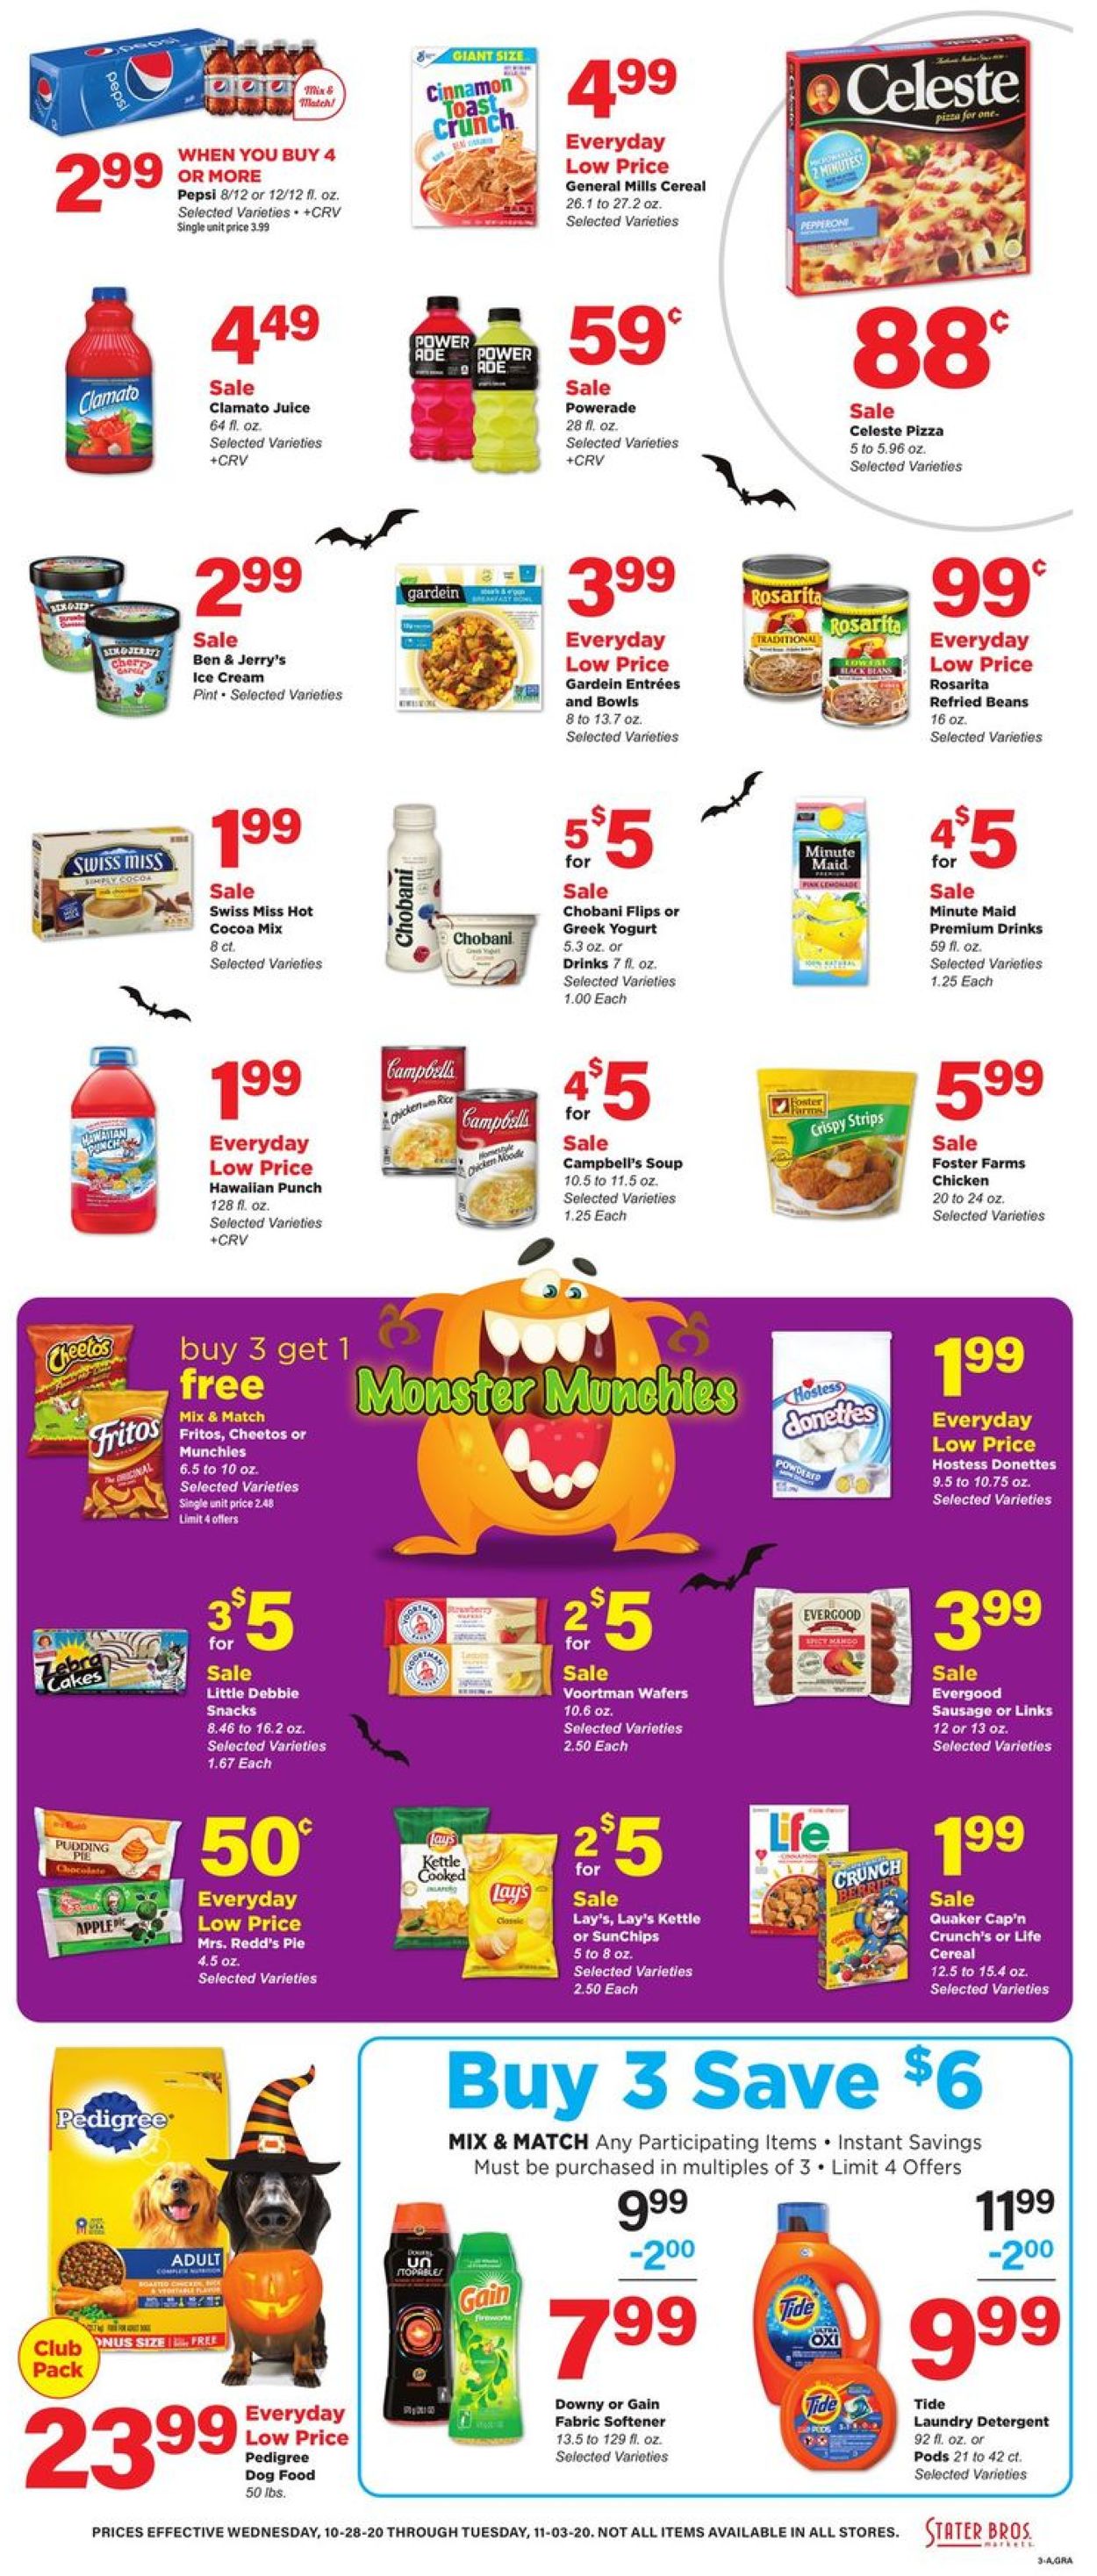 Stater Bros. Halloween 2020 Weekly Ad Circular - valid 10/28-11/03/2020 (Page 3)